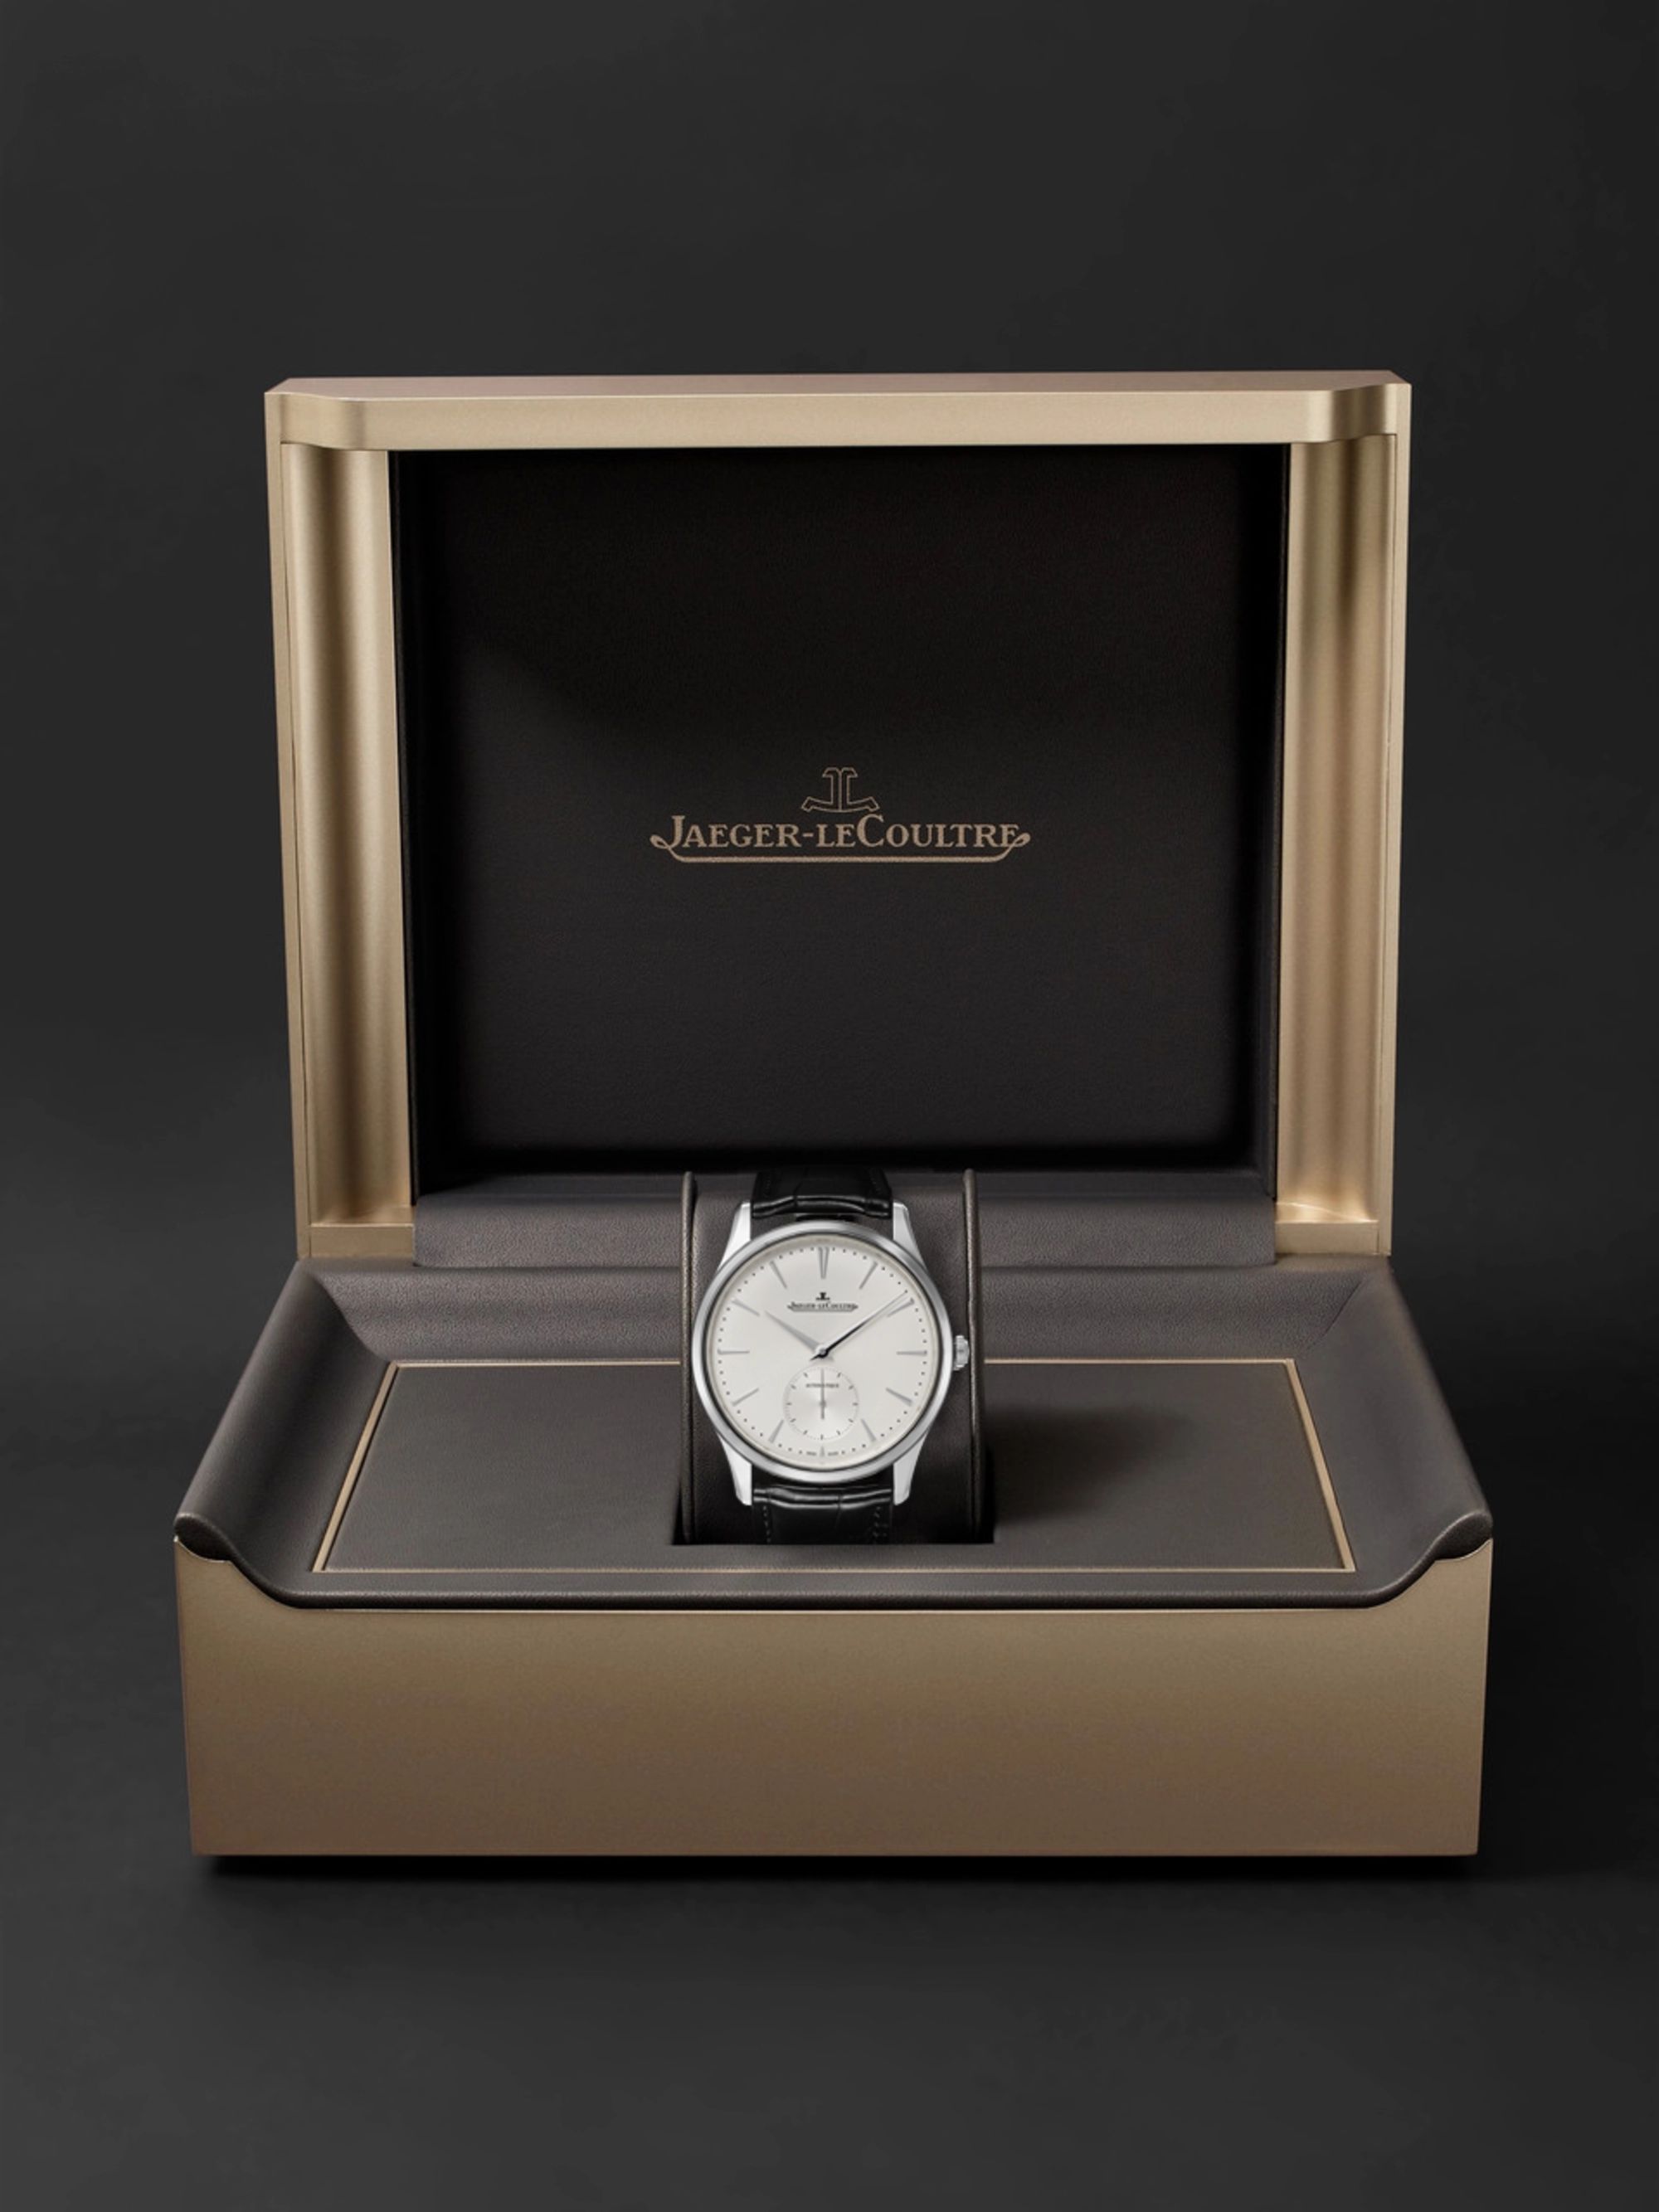 JAEGER-LECOULTRE Master Ultra Thin Small Seconds Automatic 39mm Stainless Steel and Alligator Watch, Ref. No. Q1218420